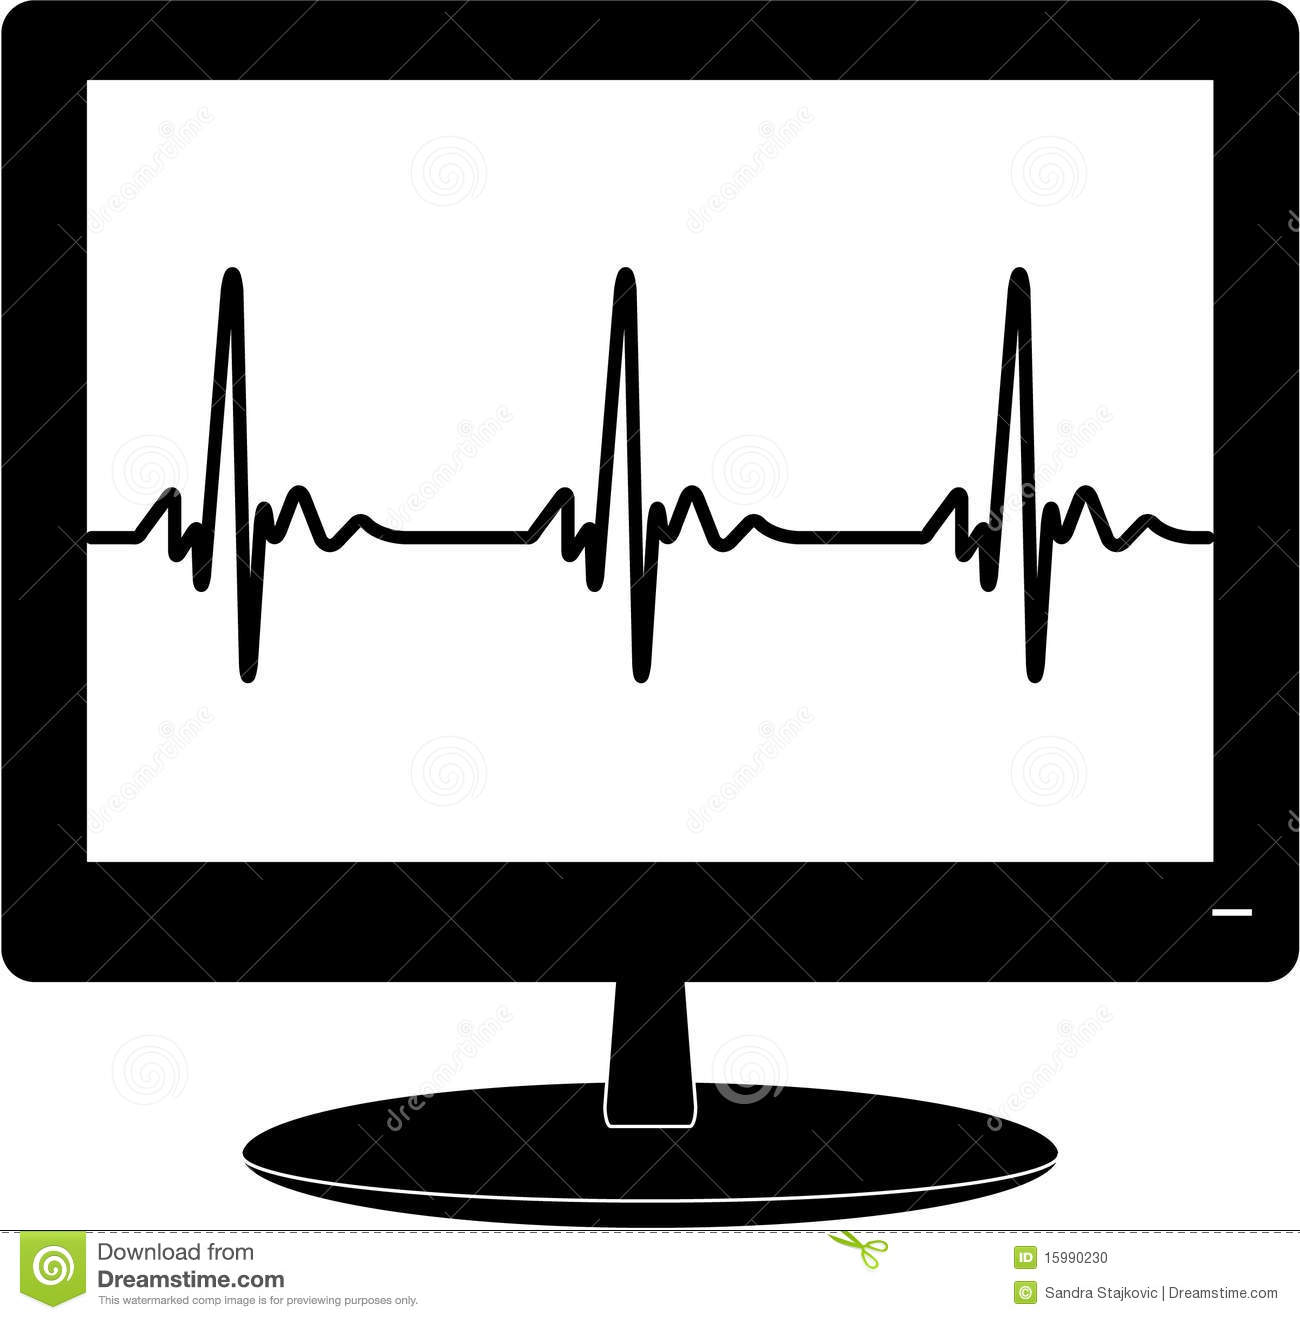 Monitor With Heartbeat On Screen Stock Photo   Image  15990230